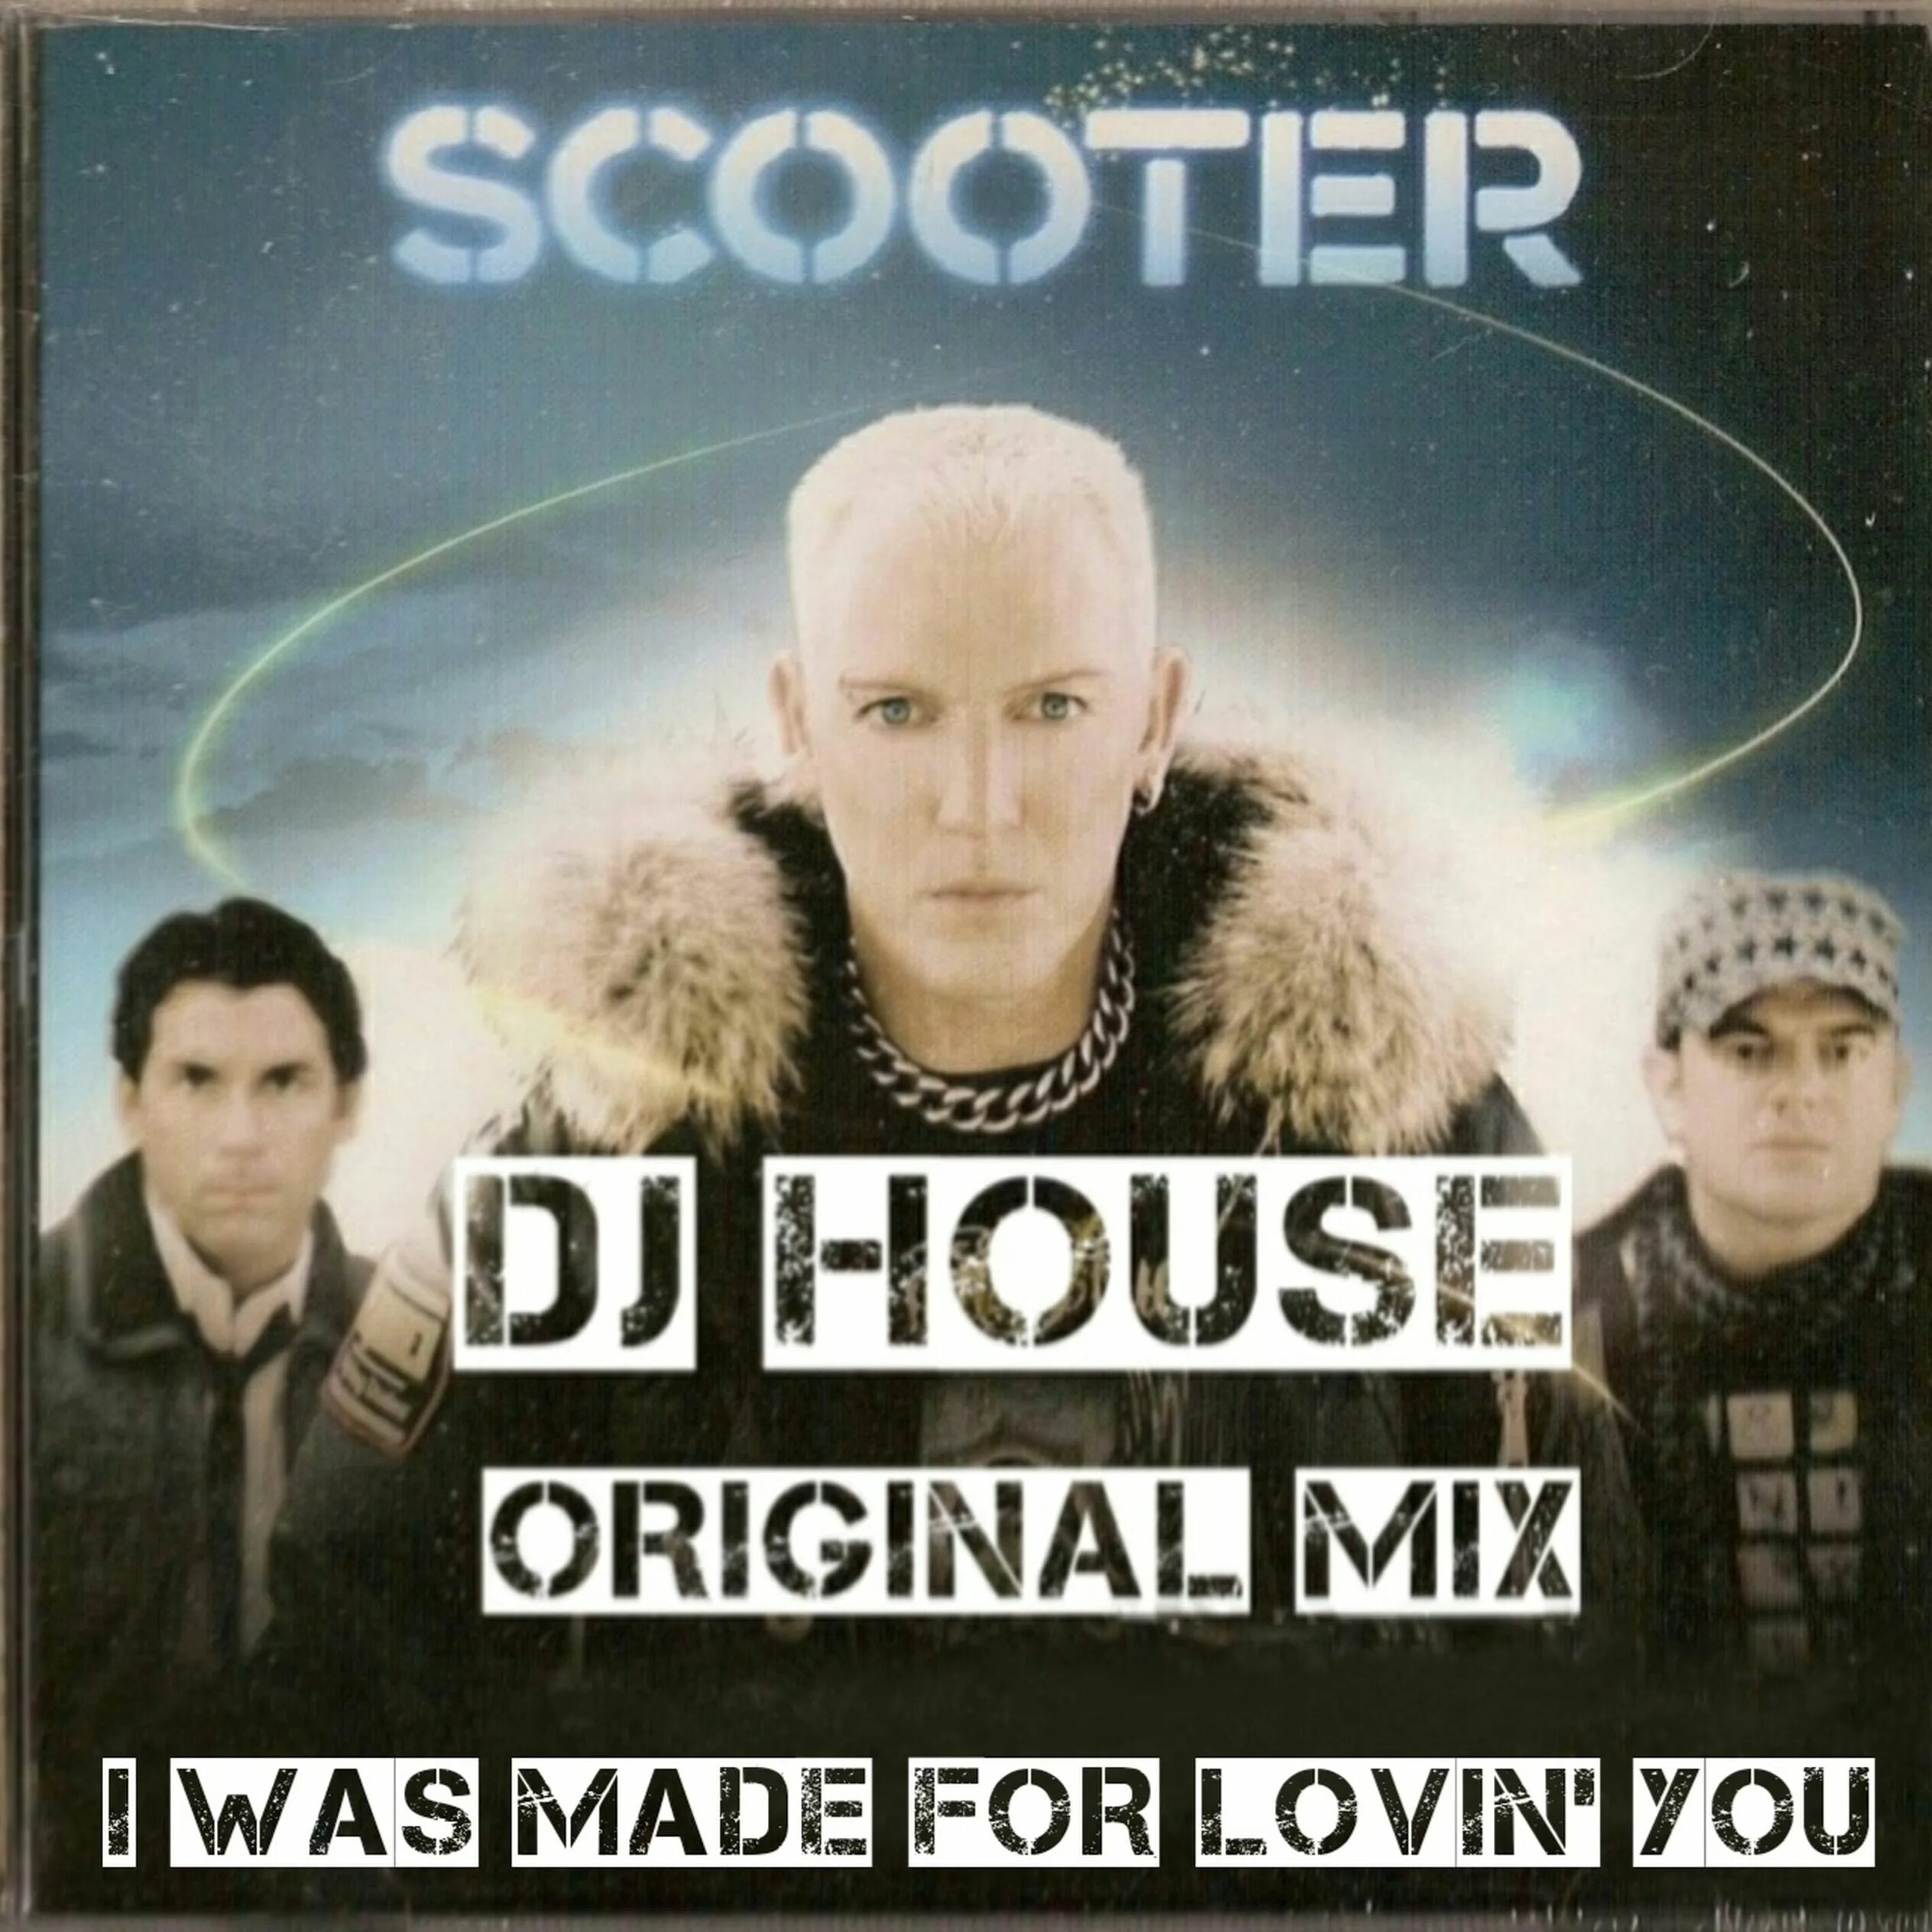 Scooter i keep hearing. Scooter i was made for loving you Baby. I was made for Lovin' you. Scooter - i was made for Lovin' you обложка альбома. Acid House Scooter.